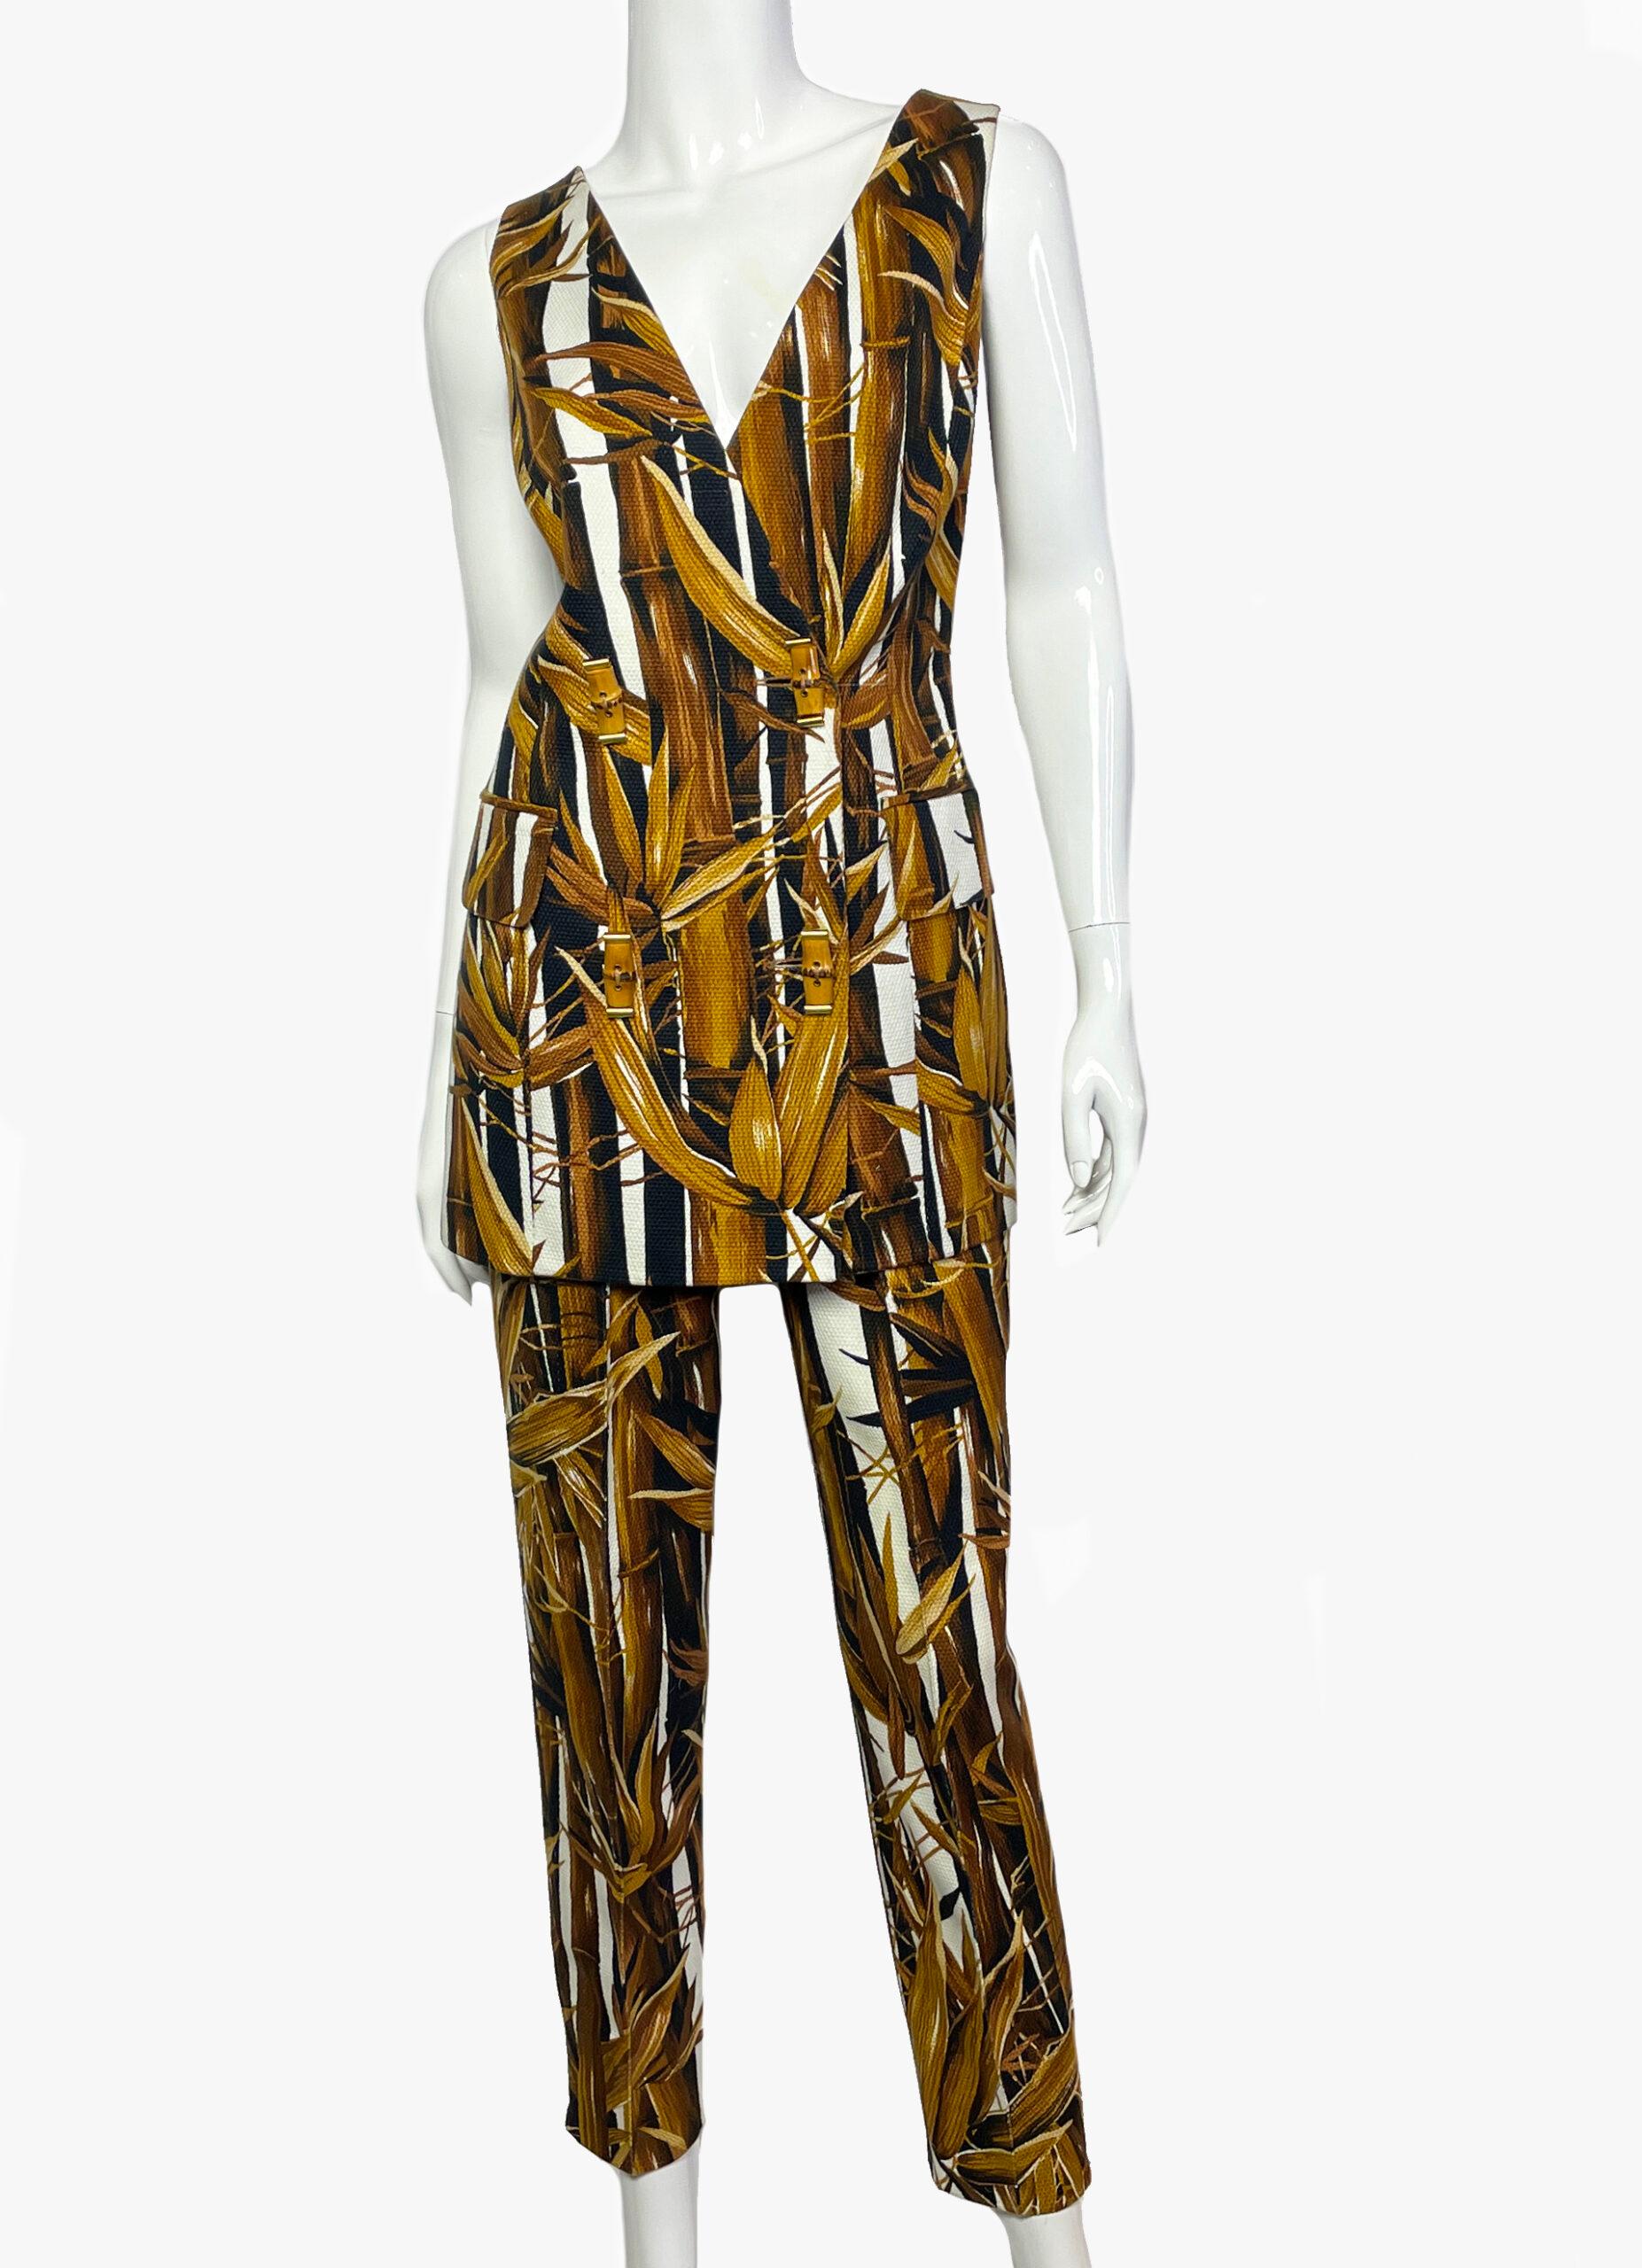 Gianfranco Ferre Vintage Pantsuit with Bamboo Buttons, 1980s

A fabulous vintage women’s two piece pants and vest ensemble from the 80s. The fabric is detailed with a bamboo print and bamboo buttons with gold accents. Perfect for a party or formal